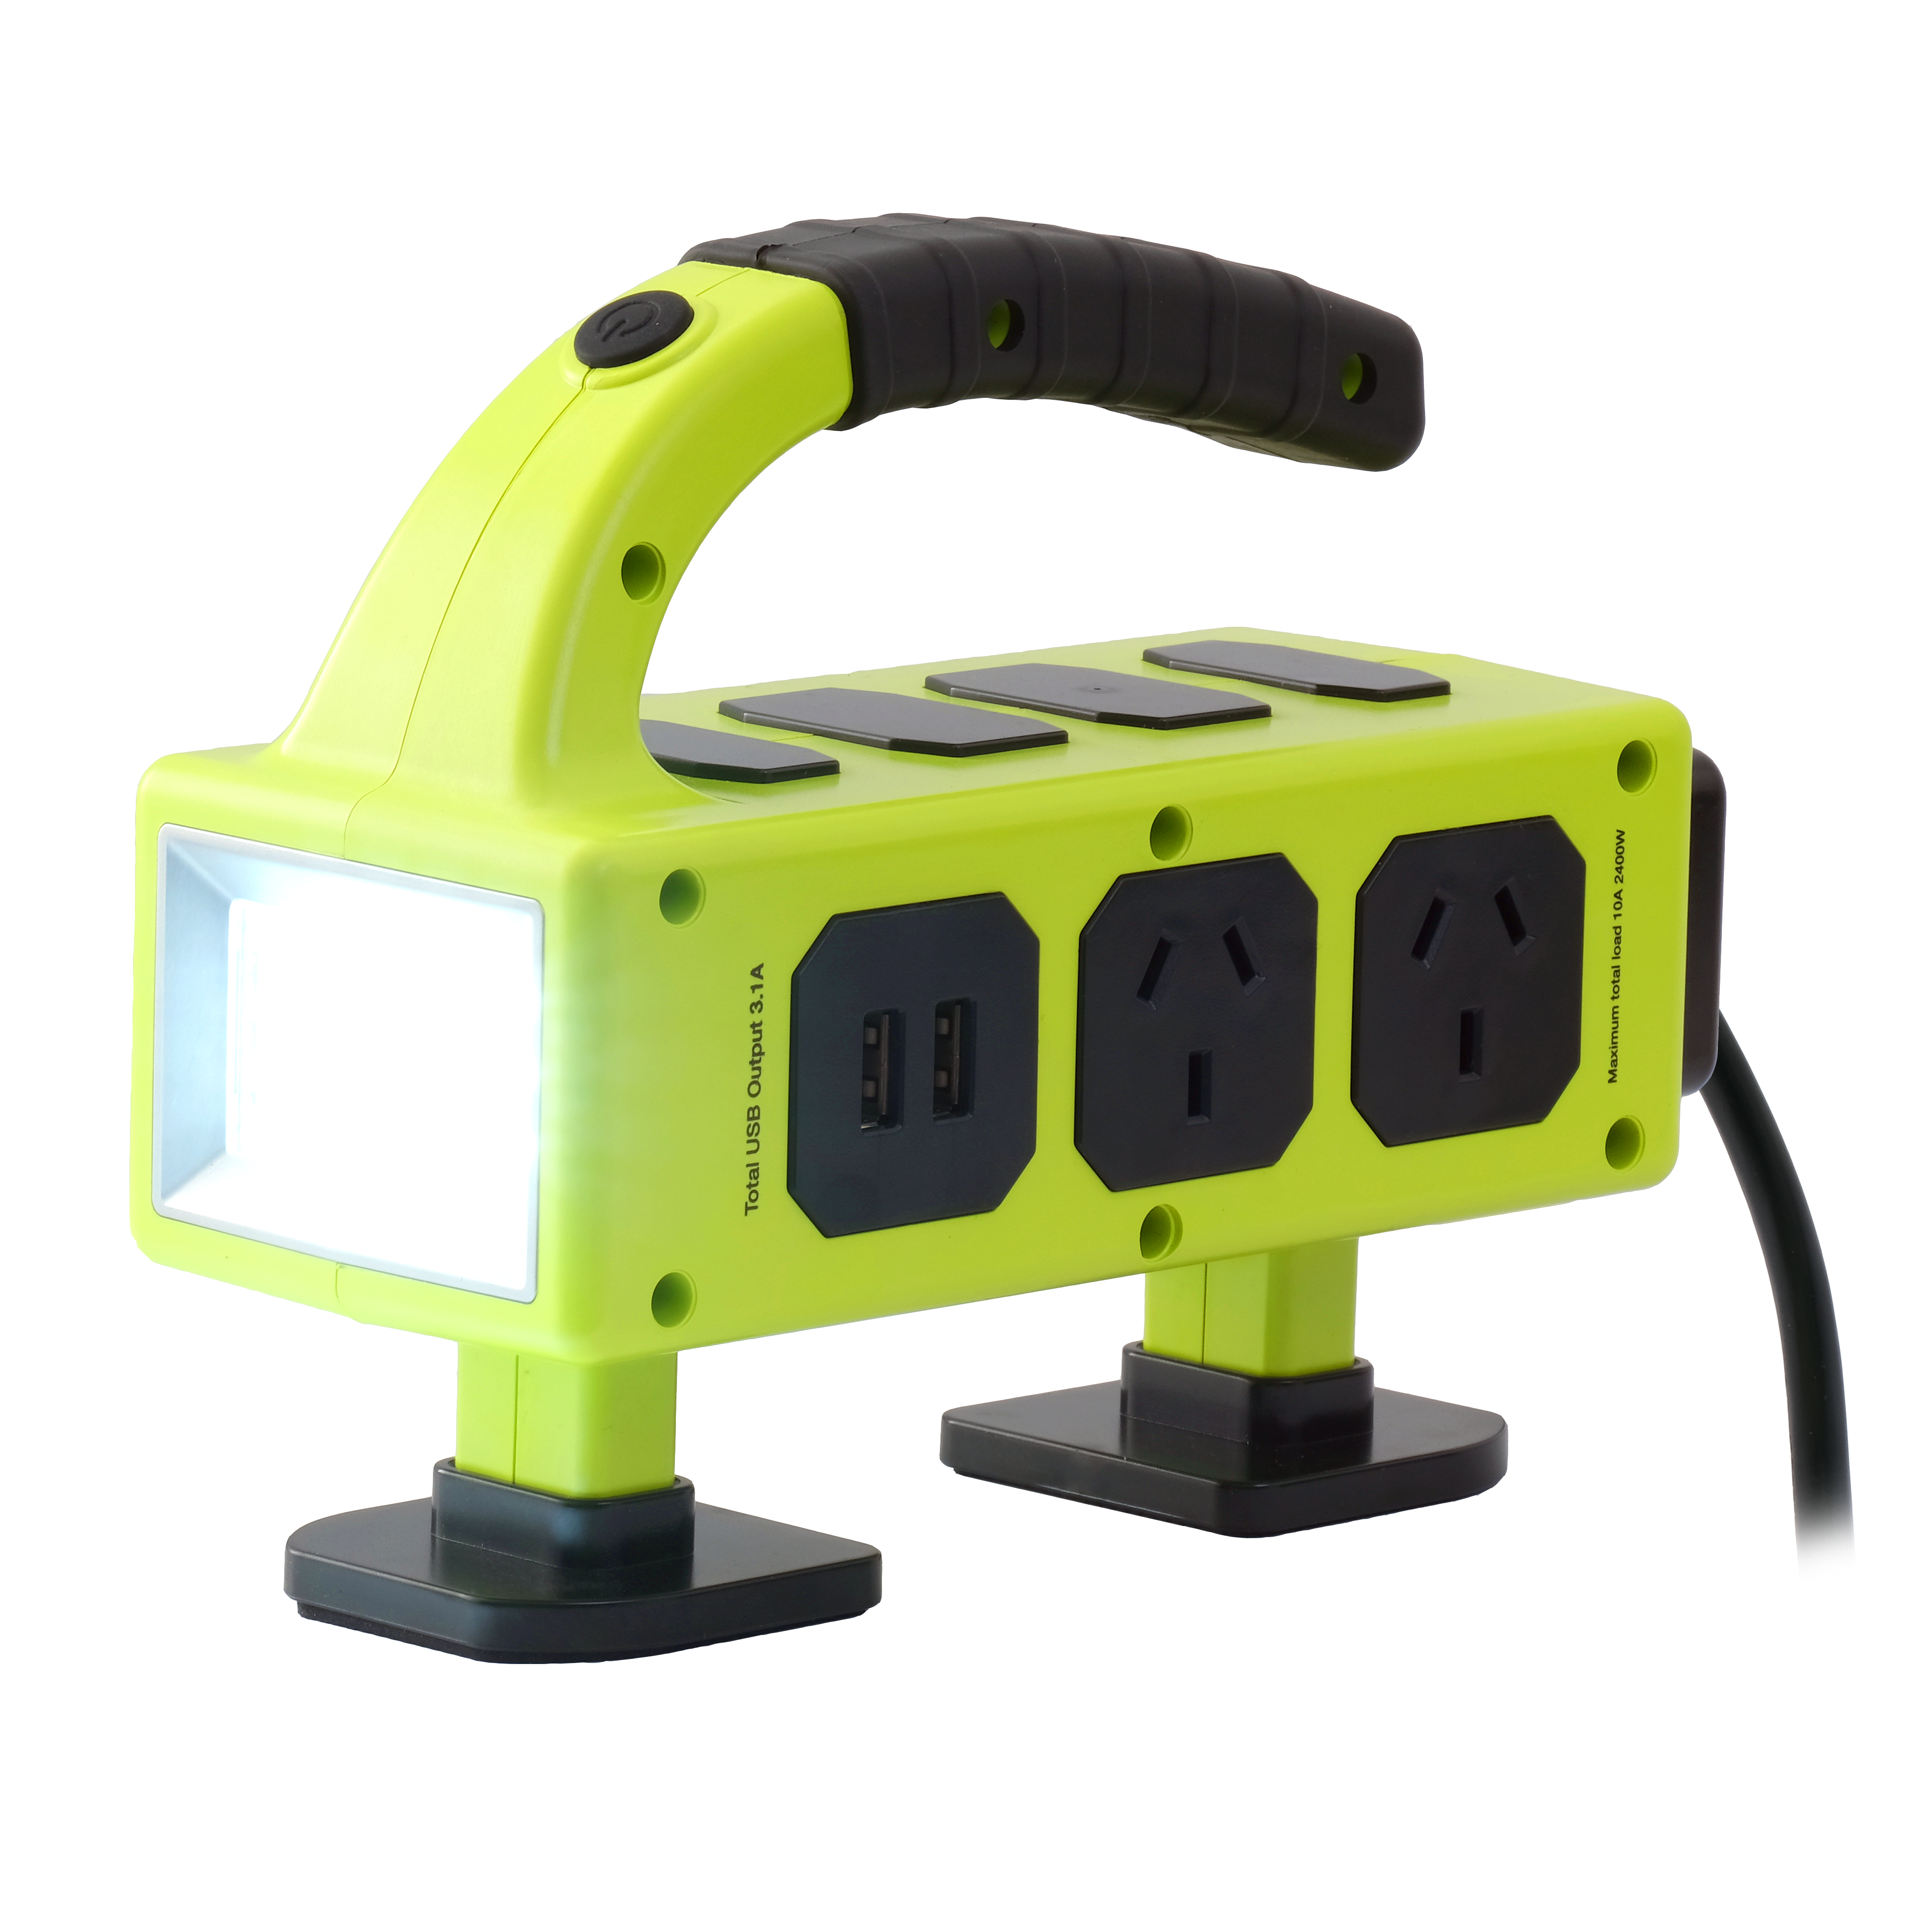 Tool Guardian 5 Socket Power Board with Worklight and USB Charging - Green